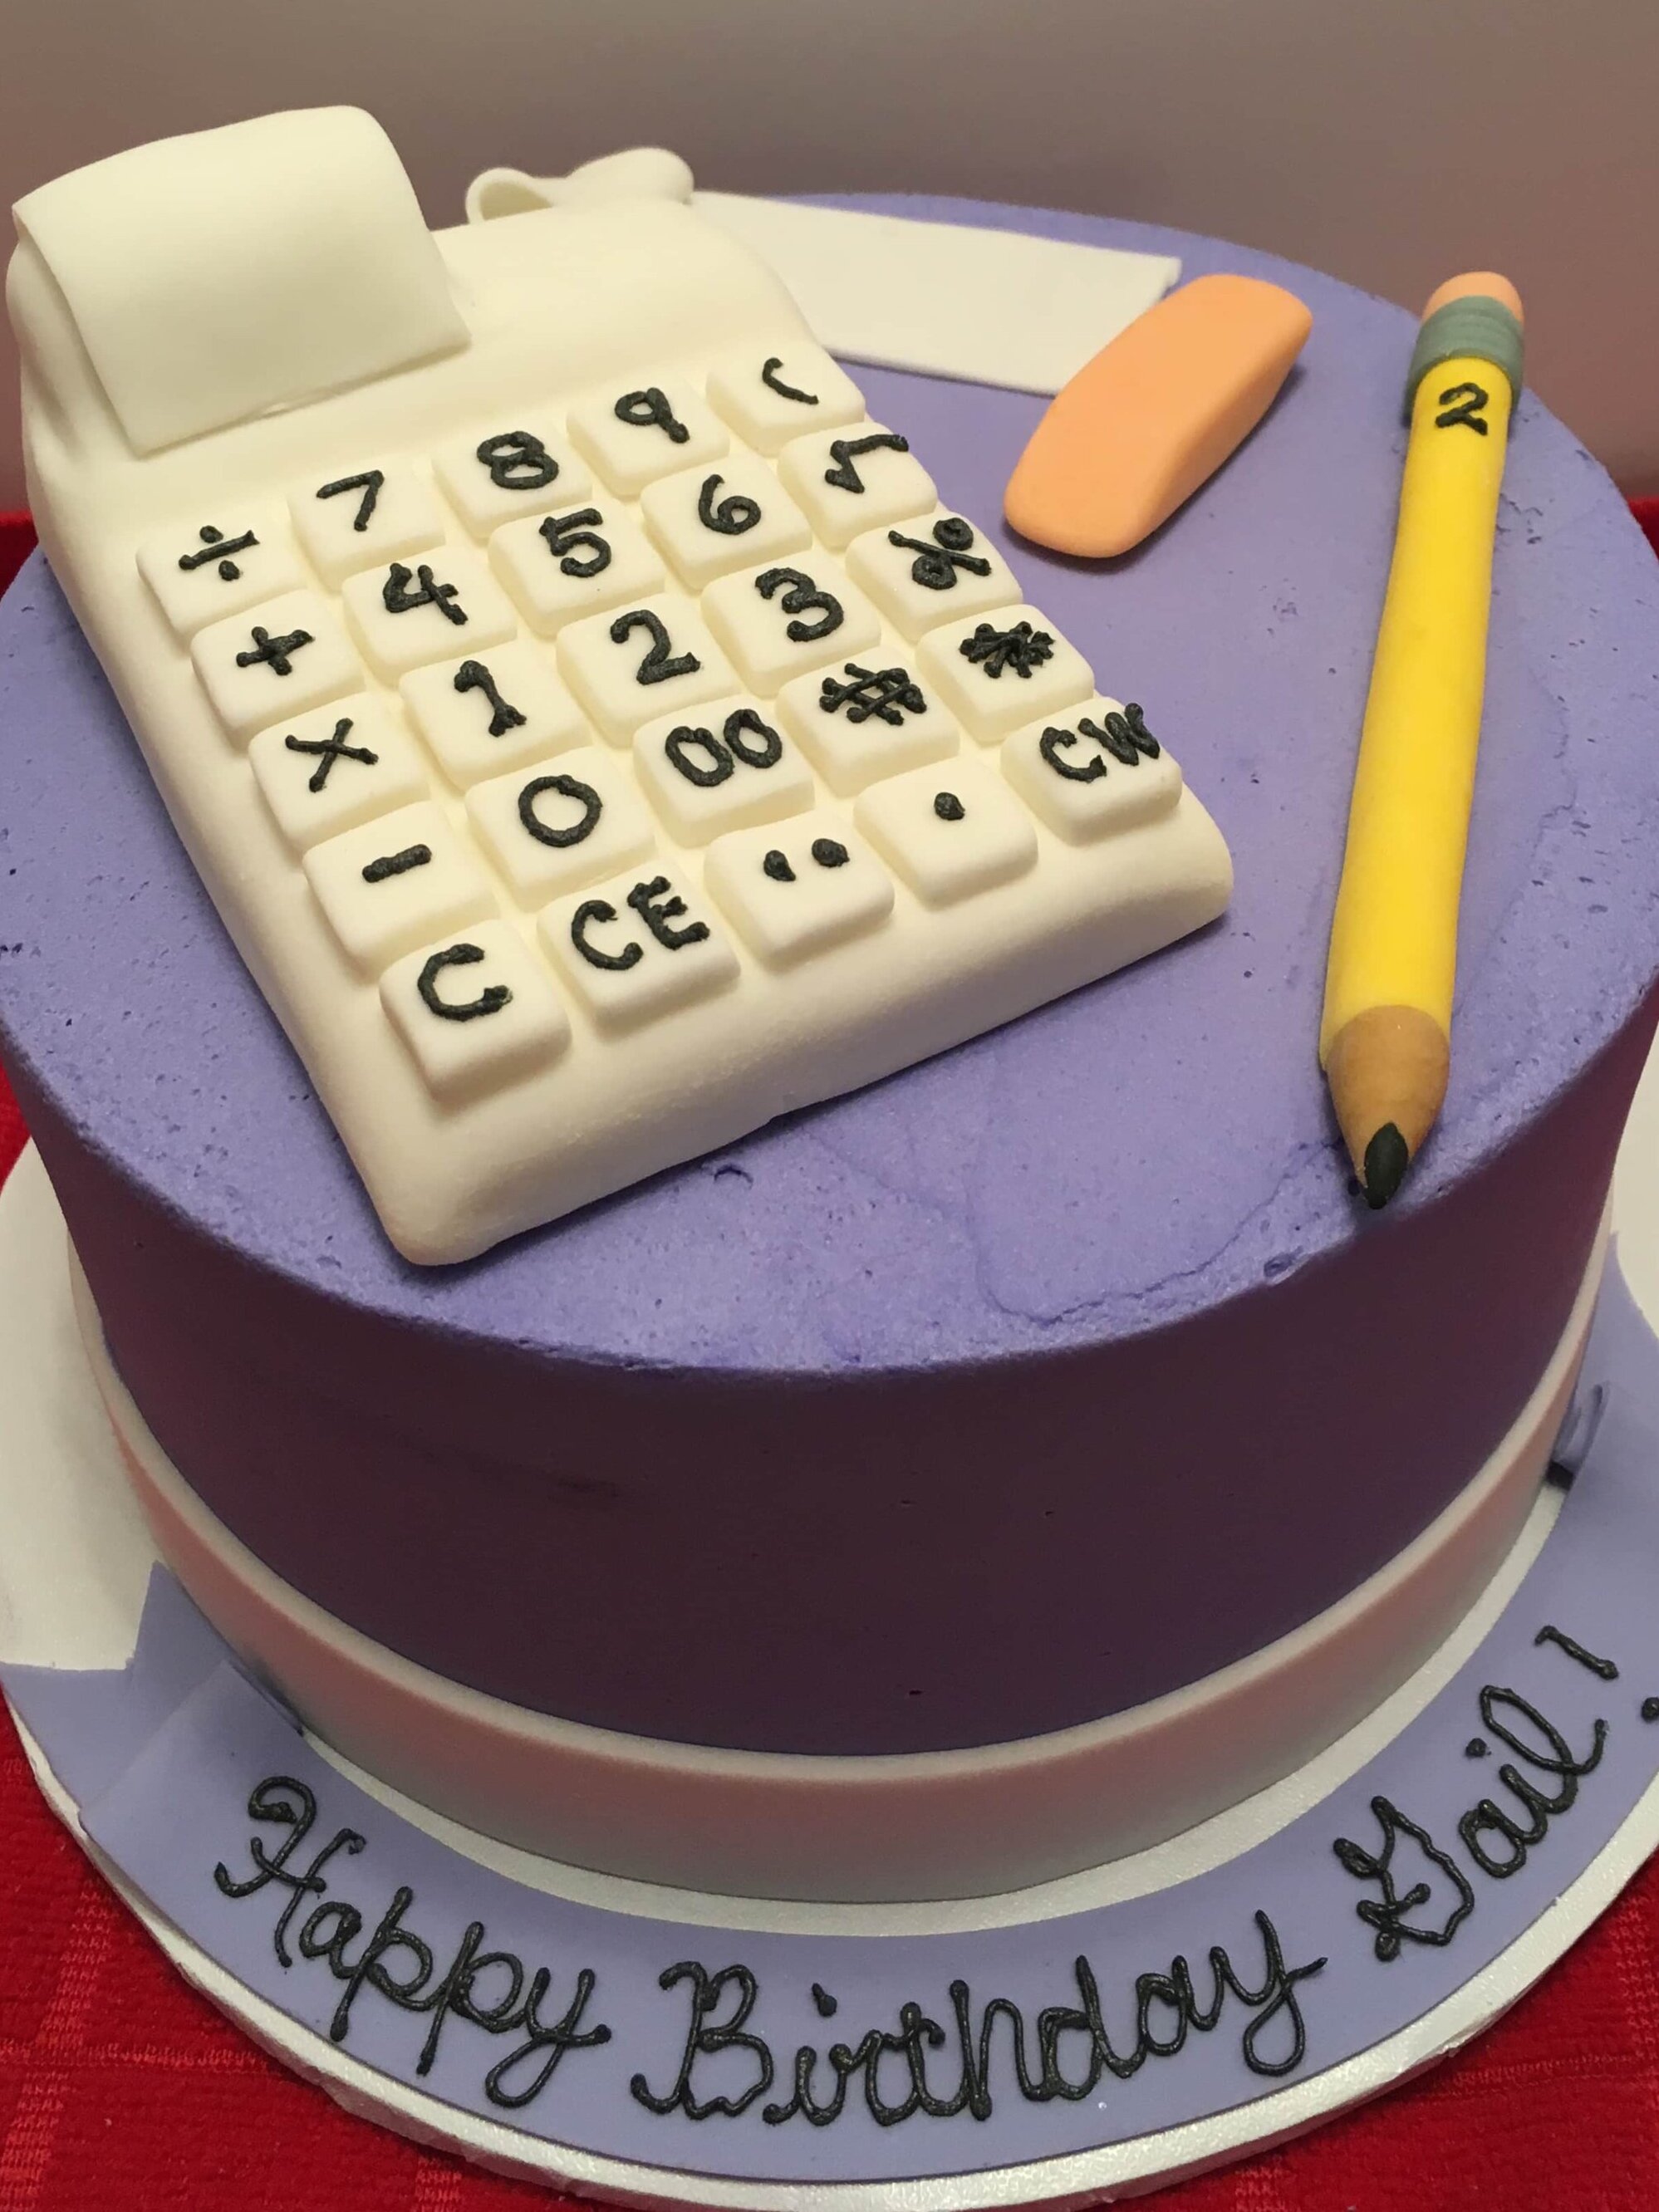 Details more than 147 accountant cake super hot